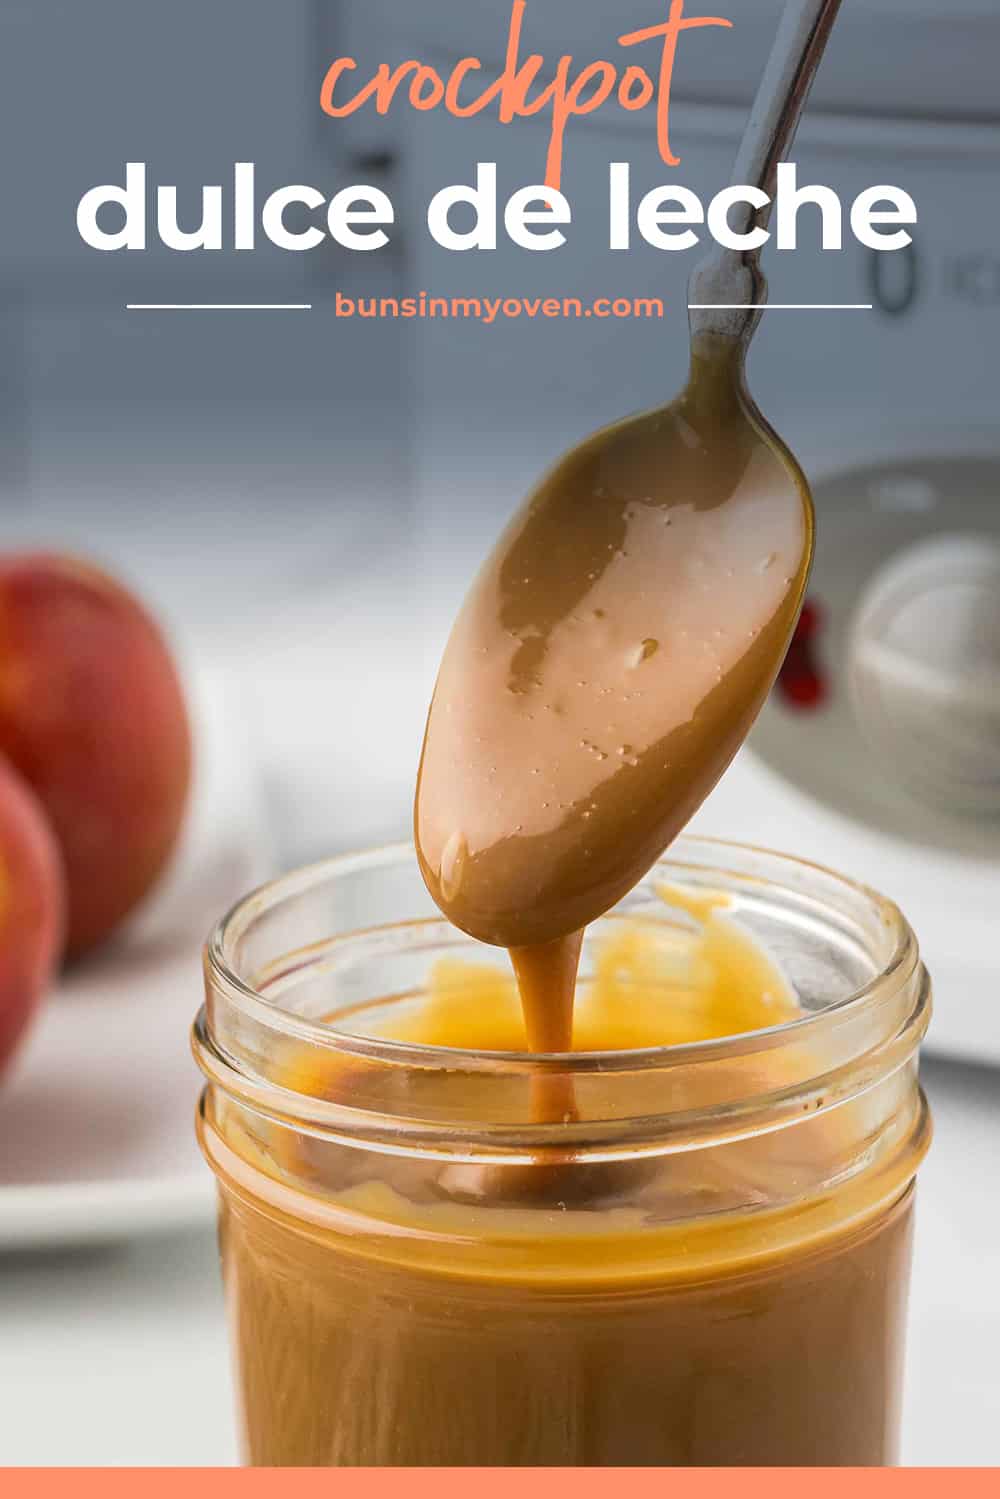 Dulce de leche being dripped off a spoon into a jar.